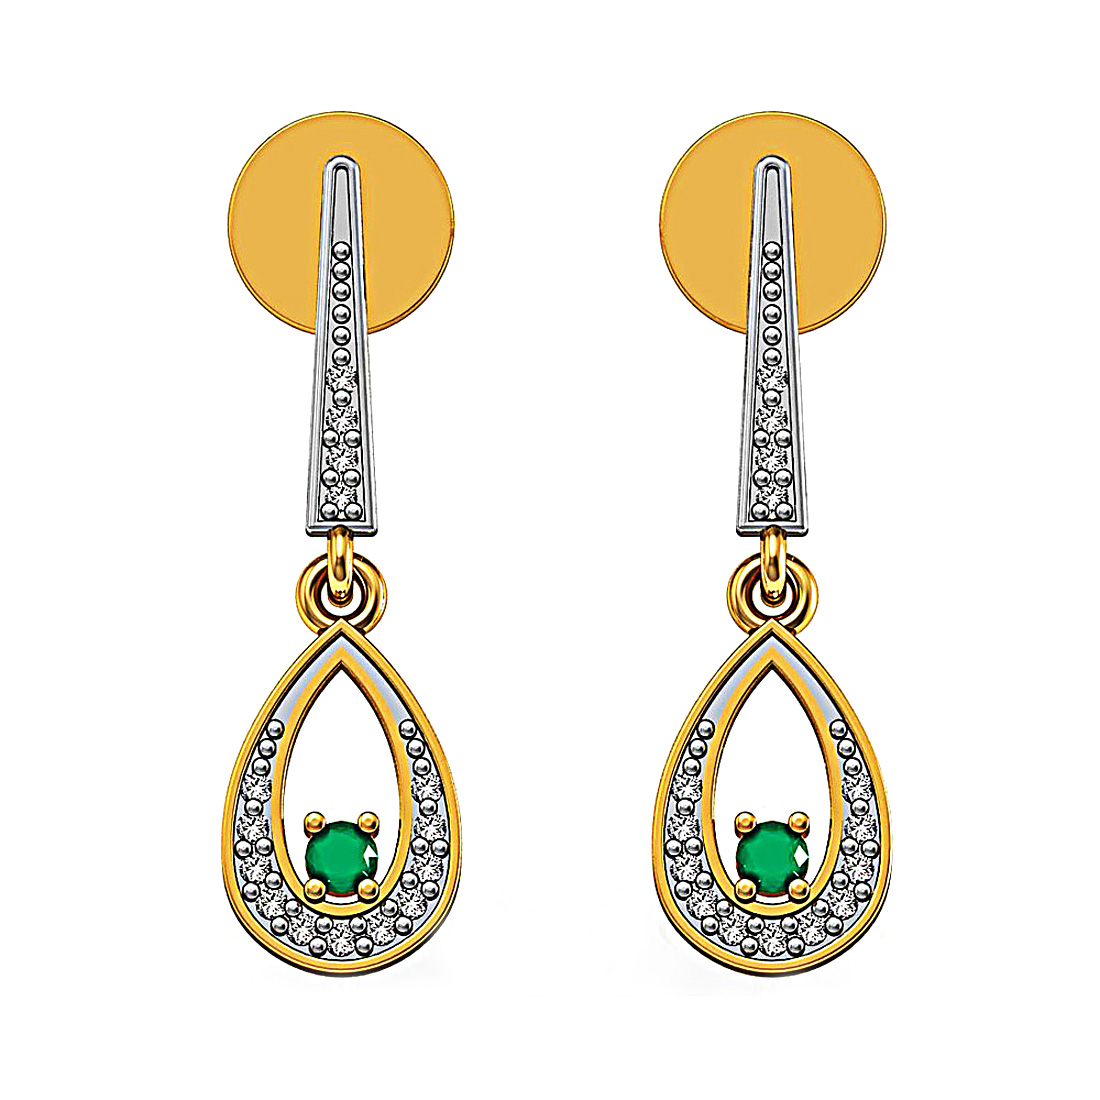 18k solid gold diamond drop stud earrings with emerald